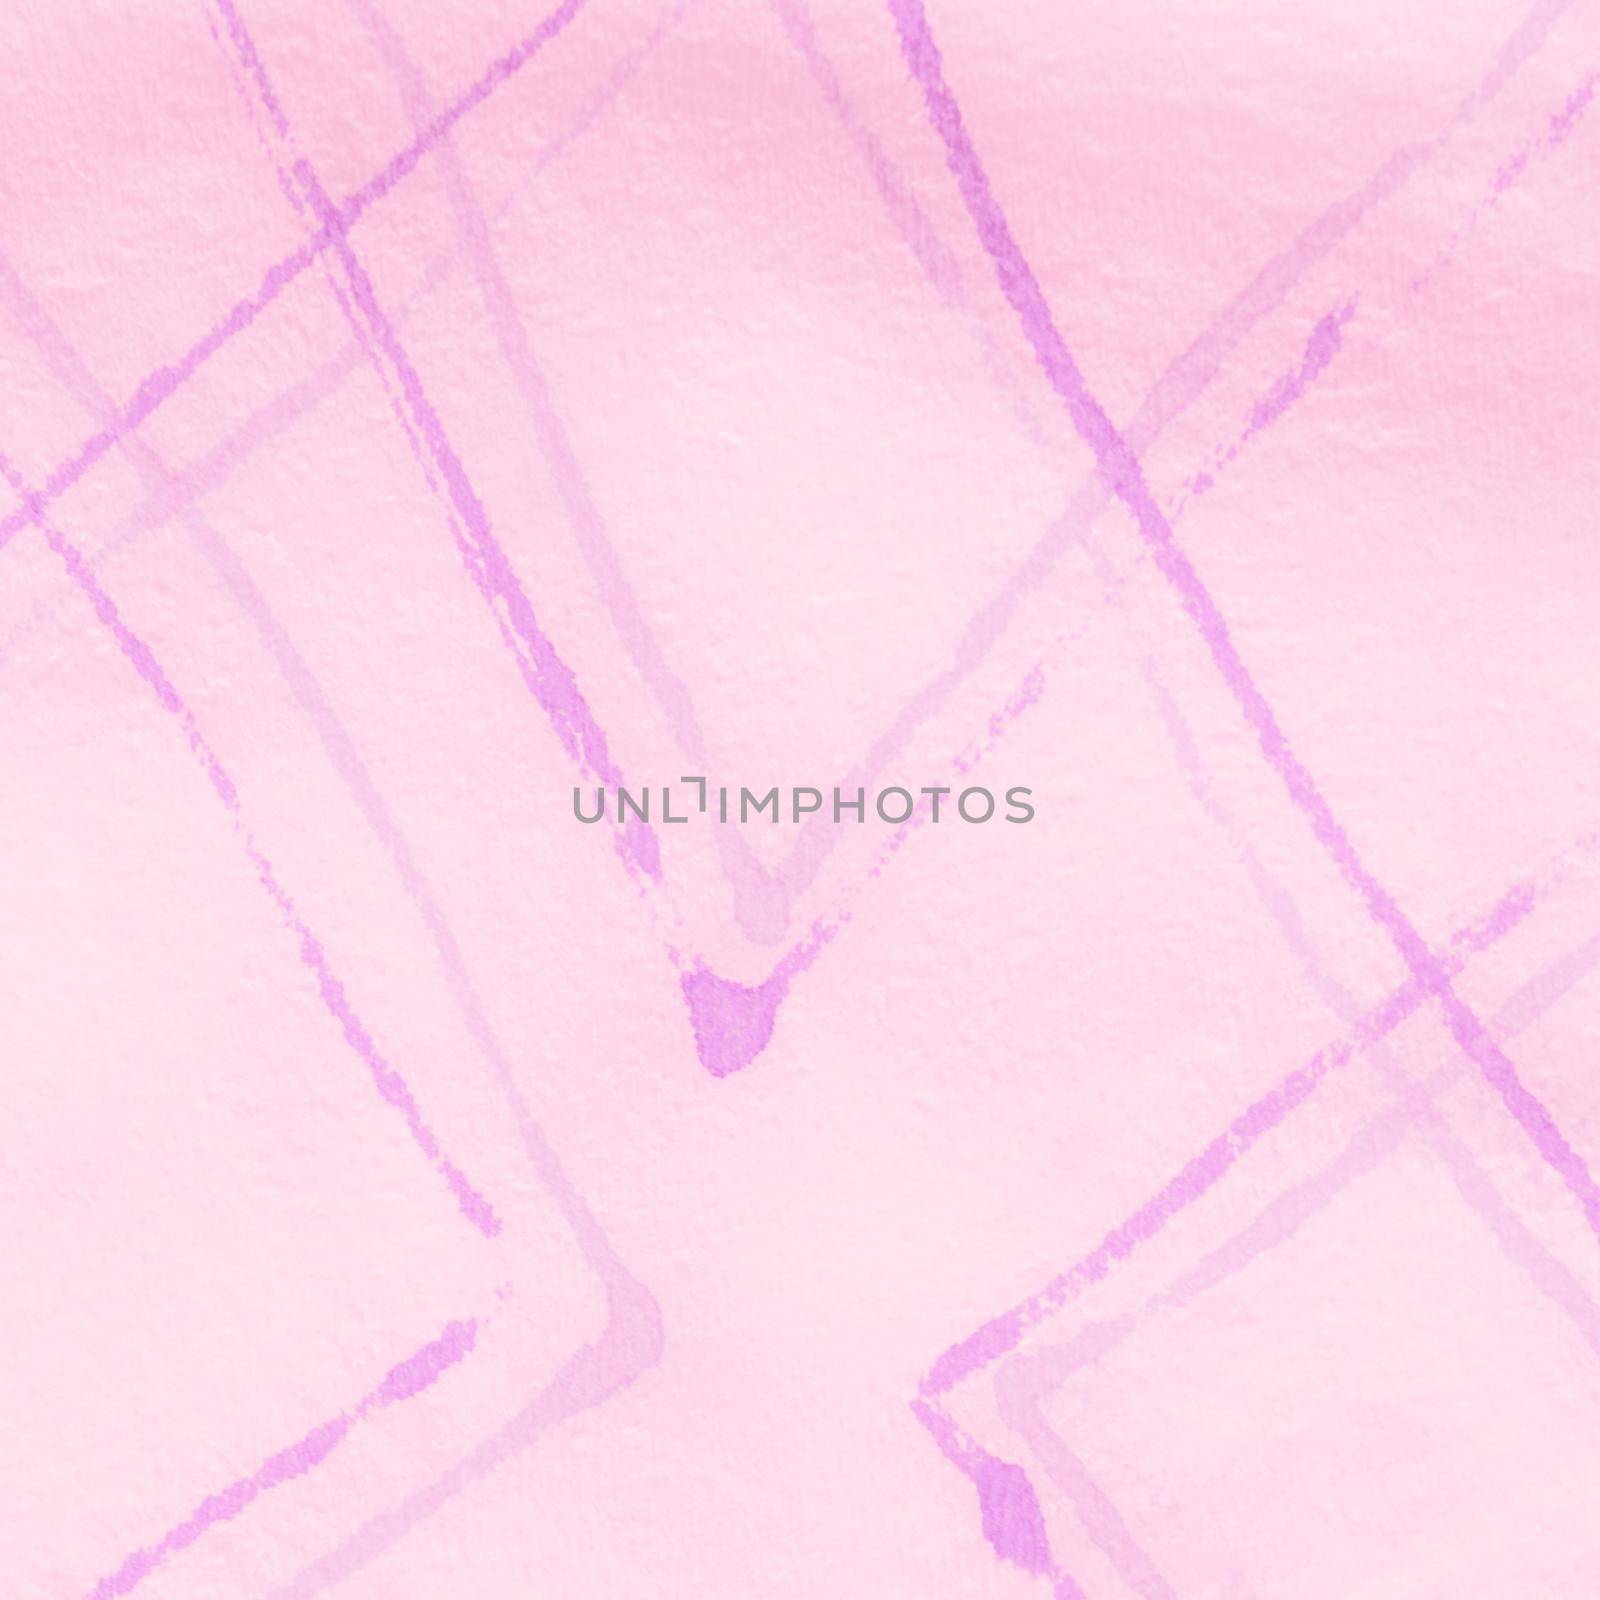 Ikat Wallpaper. Ink Painted Texture. Pink Hand Drawn Rhombus. Blurred Abstract Geometry. Nude Background. Hand Painted Brushes. Rose Zig Zag Wallpaper. Pastel Water Stripes.